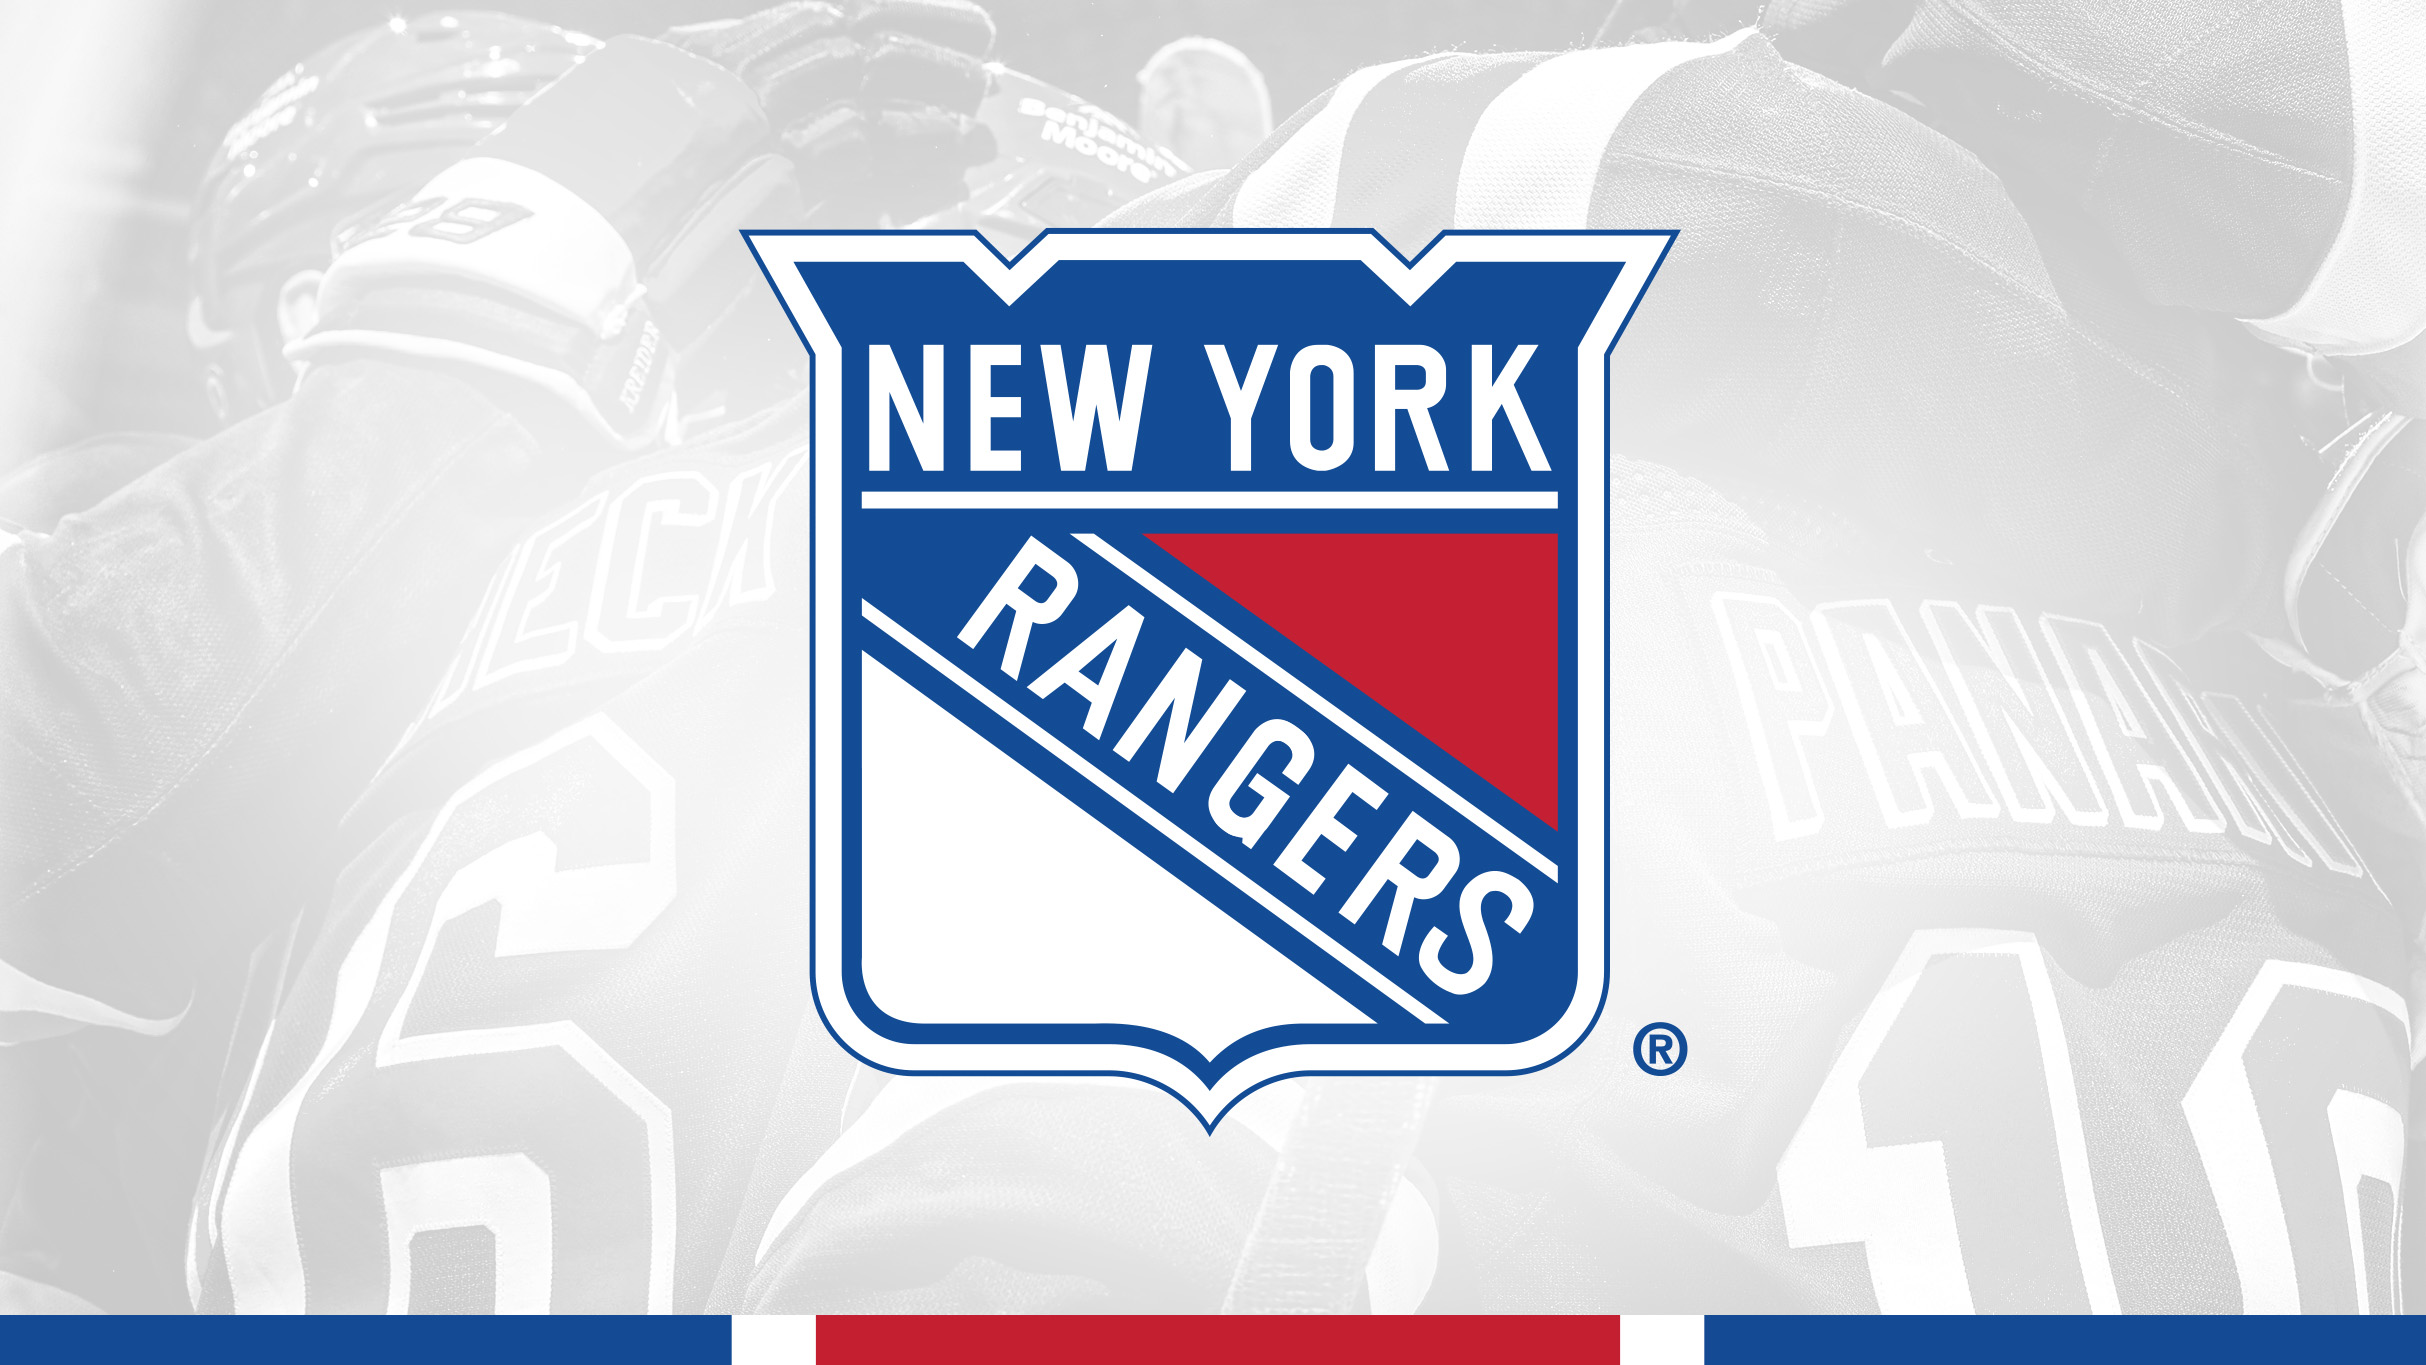 New York Rangers Road Game Viewing Party